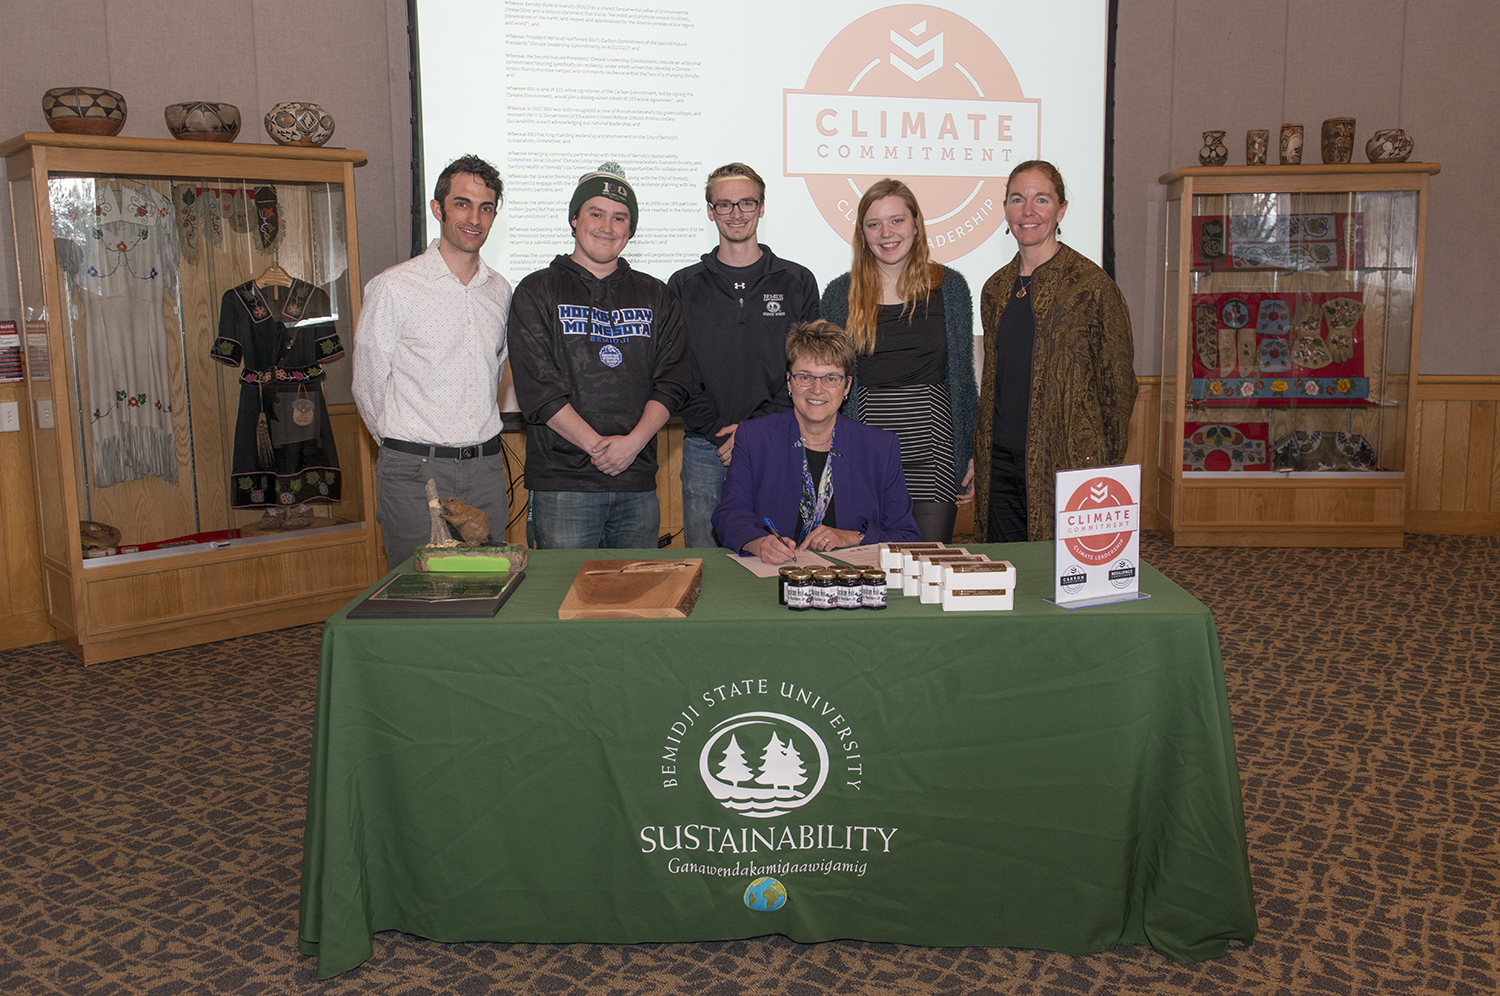 President Faith Hensrud signs Second Nature's Climate Commitment while Jordan Lutz, sustainability project manager, Connor Newby, student senate president, Corrie Stockman, student senate vice president, Anna Hayes, student senator and sustainability office employee and Erika Bailey-Johnson, sustainability coordinator, look on.